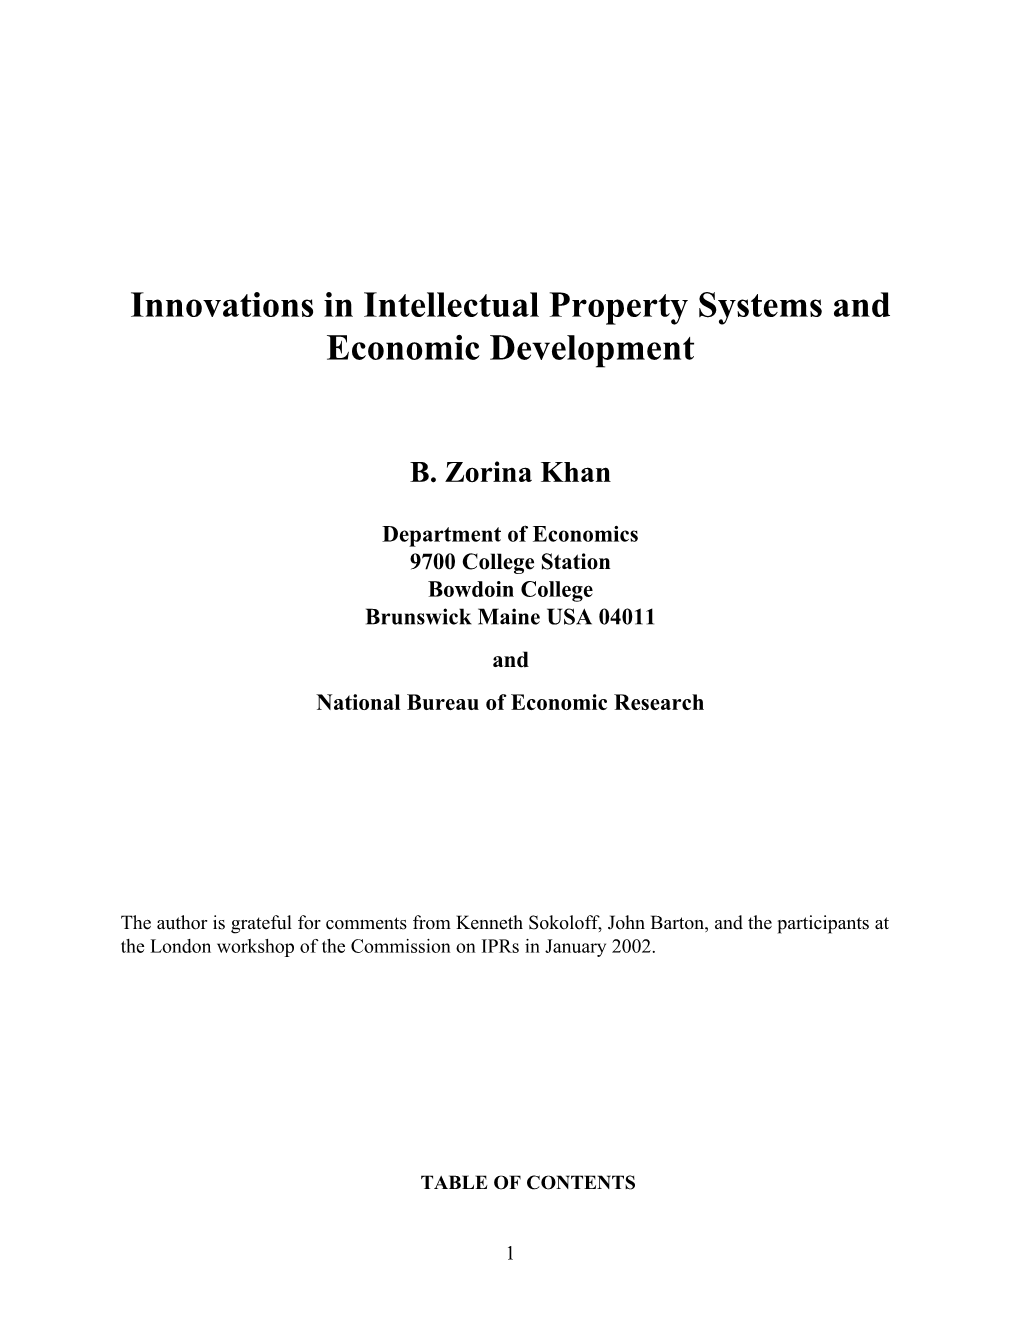 Innovations in Intellectual Property Systems and Economic Development